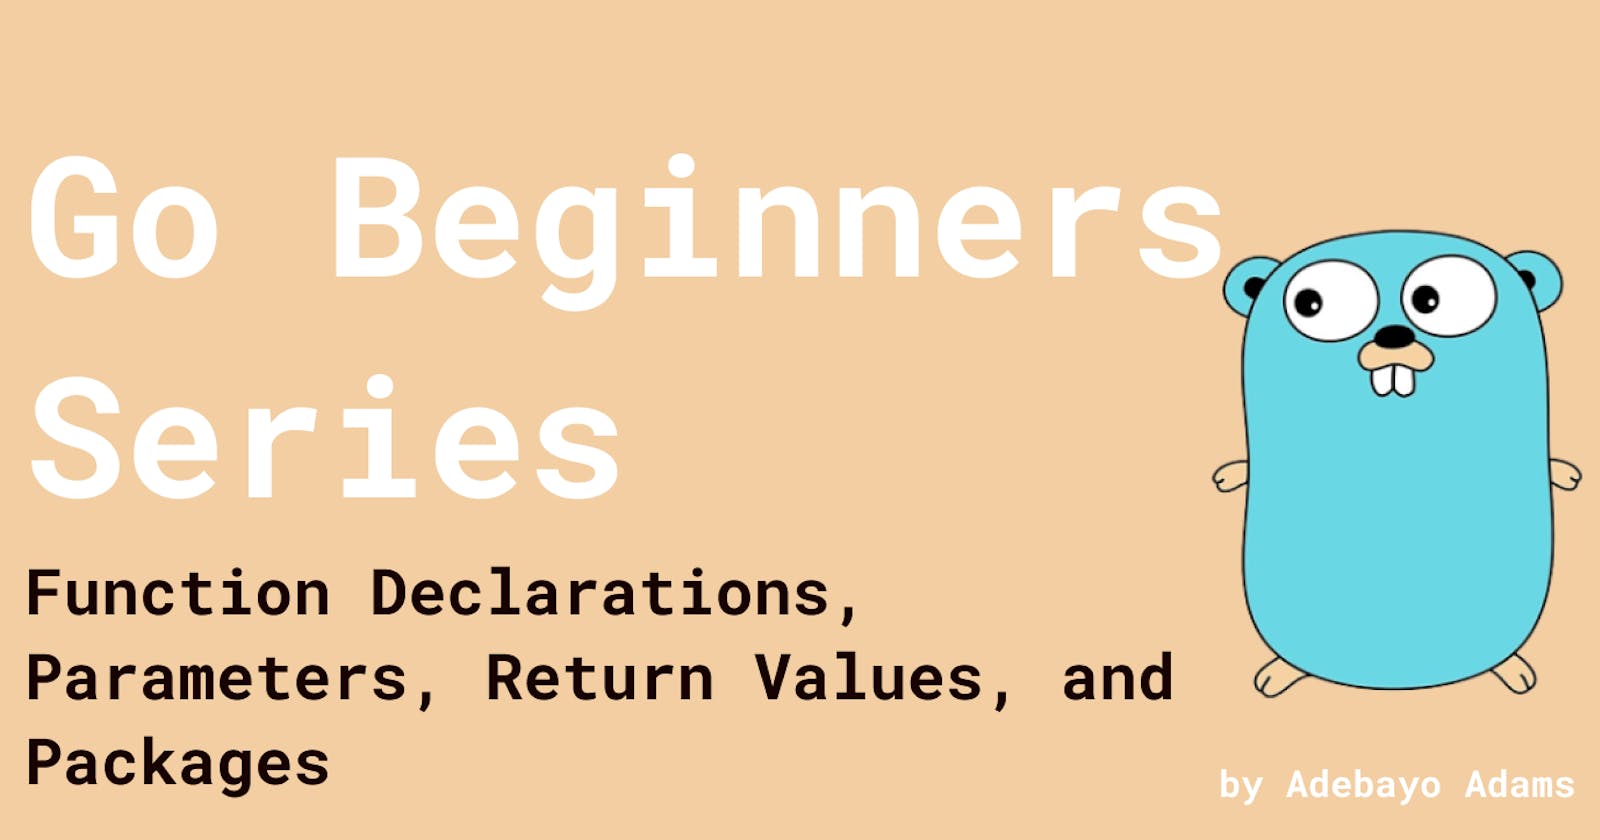 Go Beginners Series: Function Declarations, Parameters, Return Values, and Packages